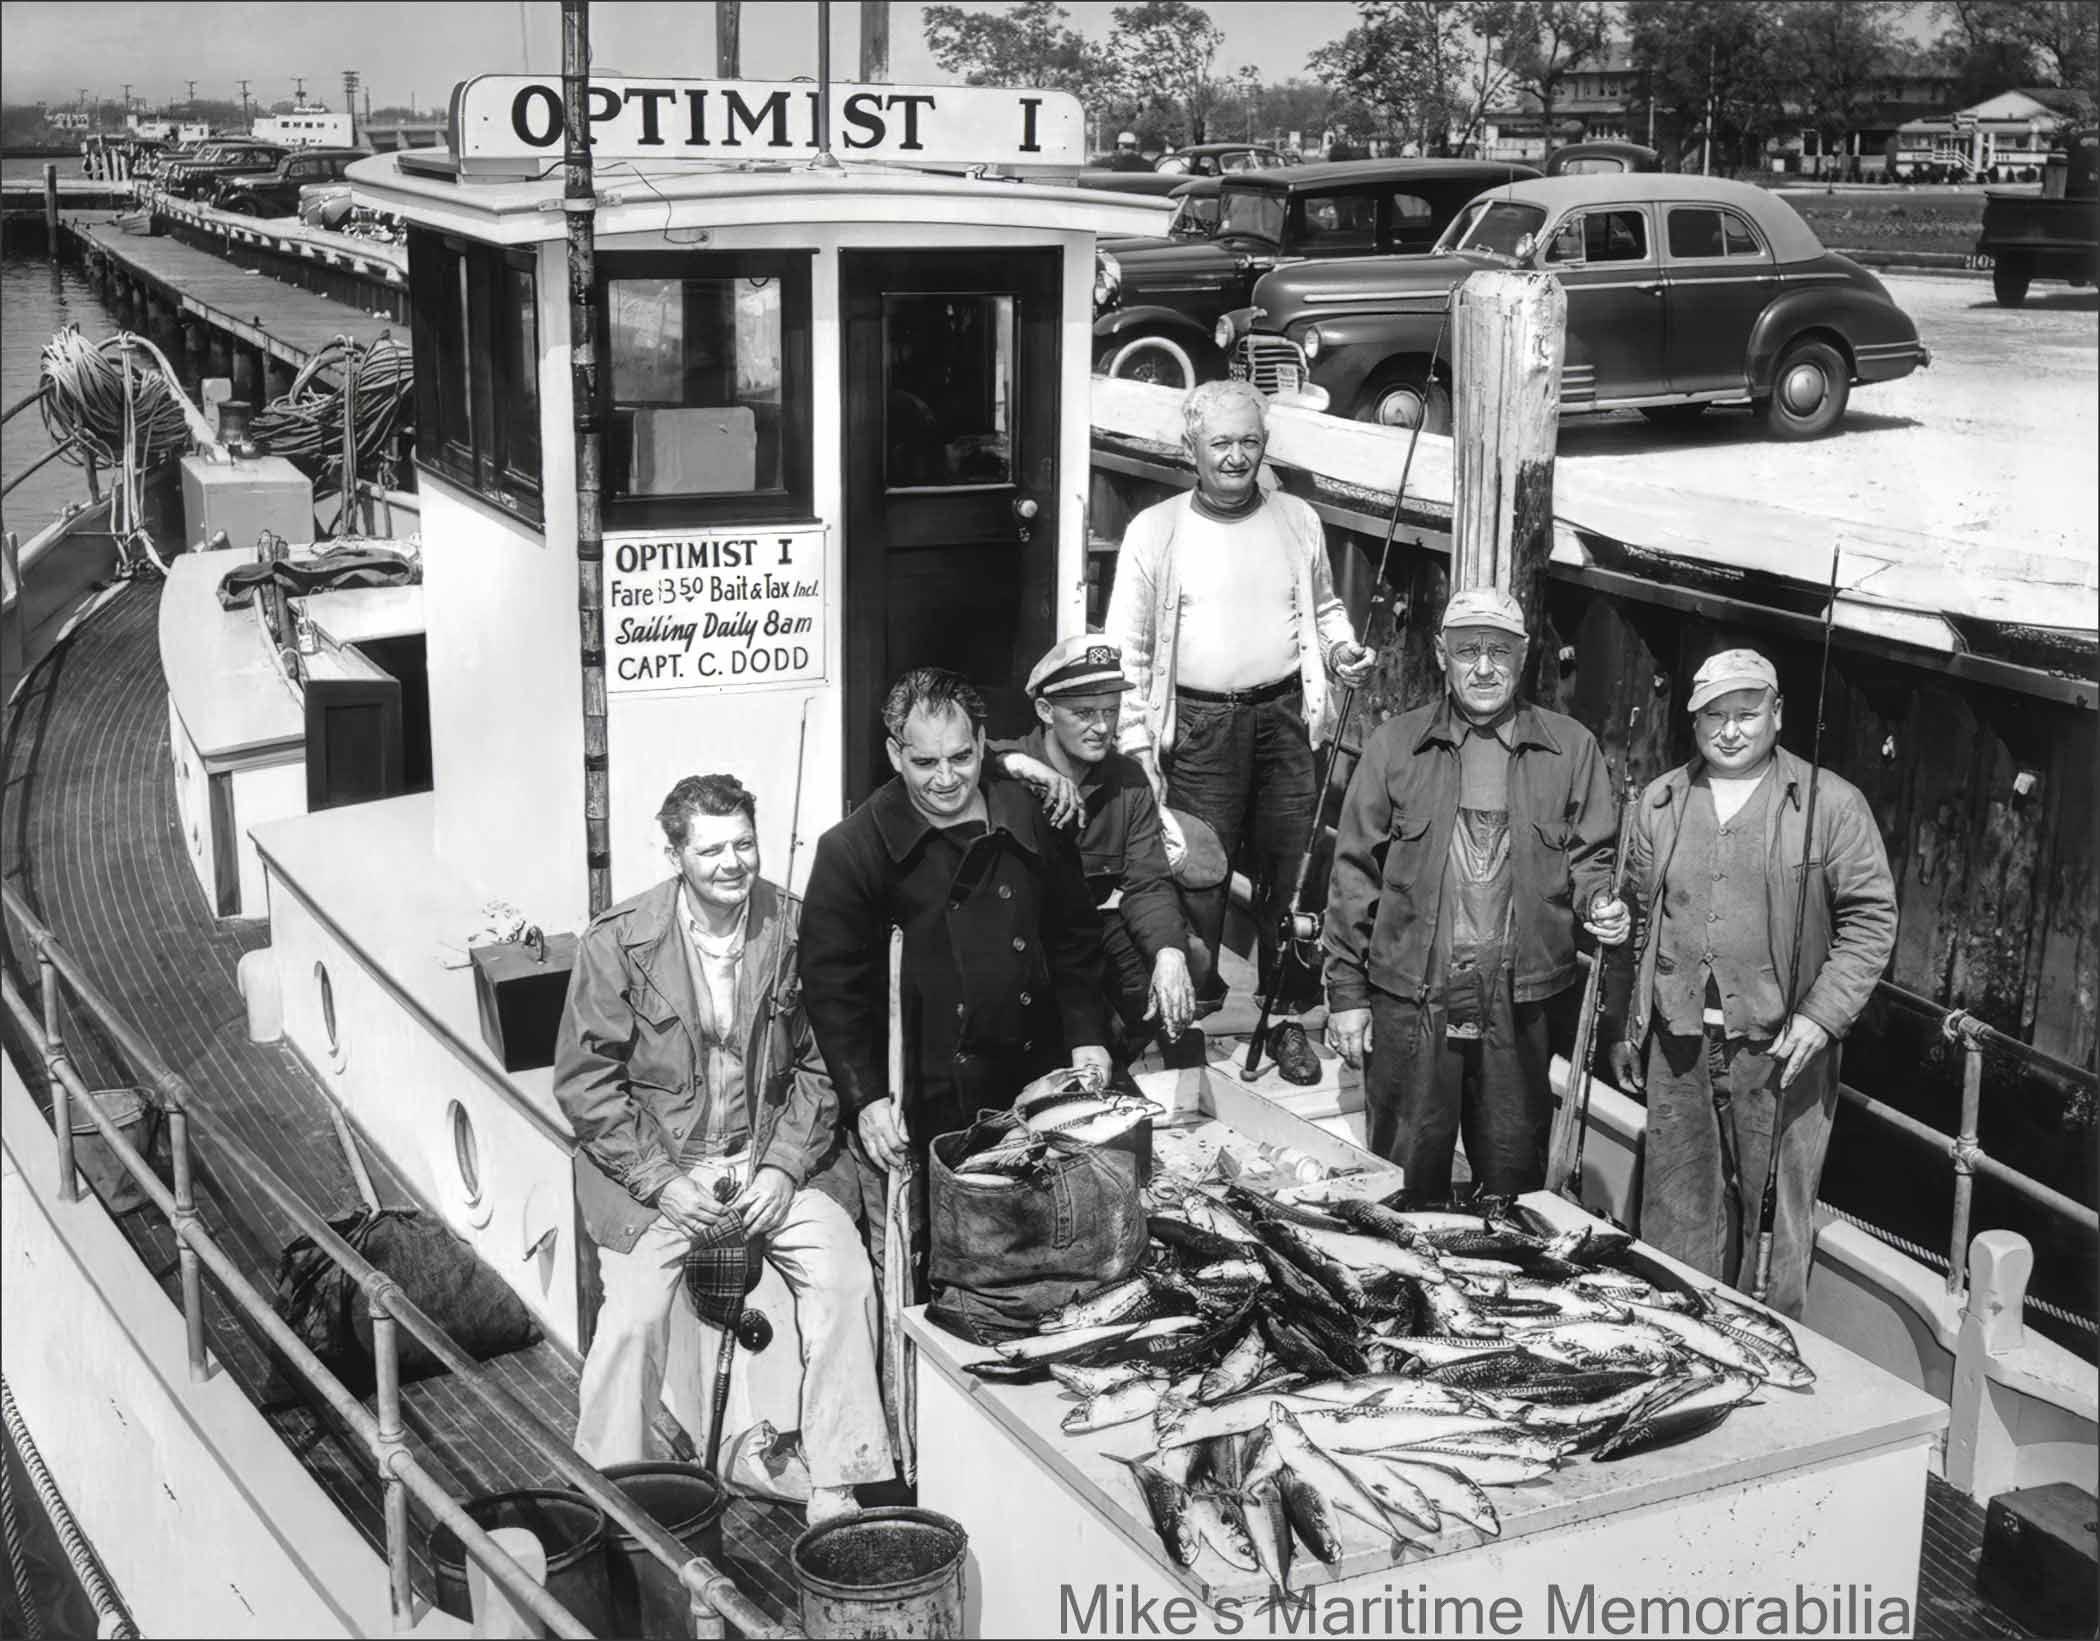 OPTIMIST I, Belmar, NJ – 1951 Captain Charlie Dodd is shown here with a group of 'regulars' after returning from a day of Mackerel fishing aboard his "OPTIMIST I" in the spring of 1951. In 1939, Captain Dodd was the first party boat operator to sail from the newly opened Belmar Marina at Belmar, NJ. Ernest Feidler built the "OPTIMIST I" in 1946 at his Bergen Beach Boatworks at Brooklyn, NY. She was sold in 1952 and became Captain Doug Macintosh’s "IDEAL I" from Point Pleasant Beach, NJ. The photo is courtesy of Ray Dodd.